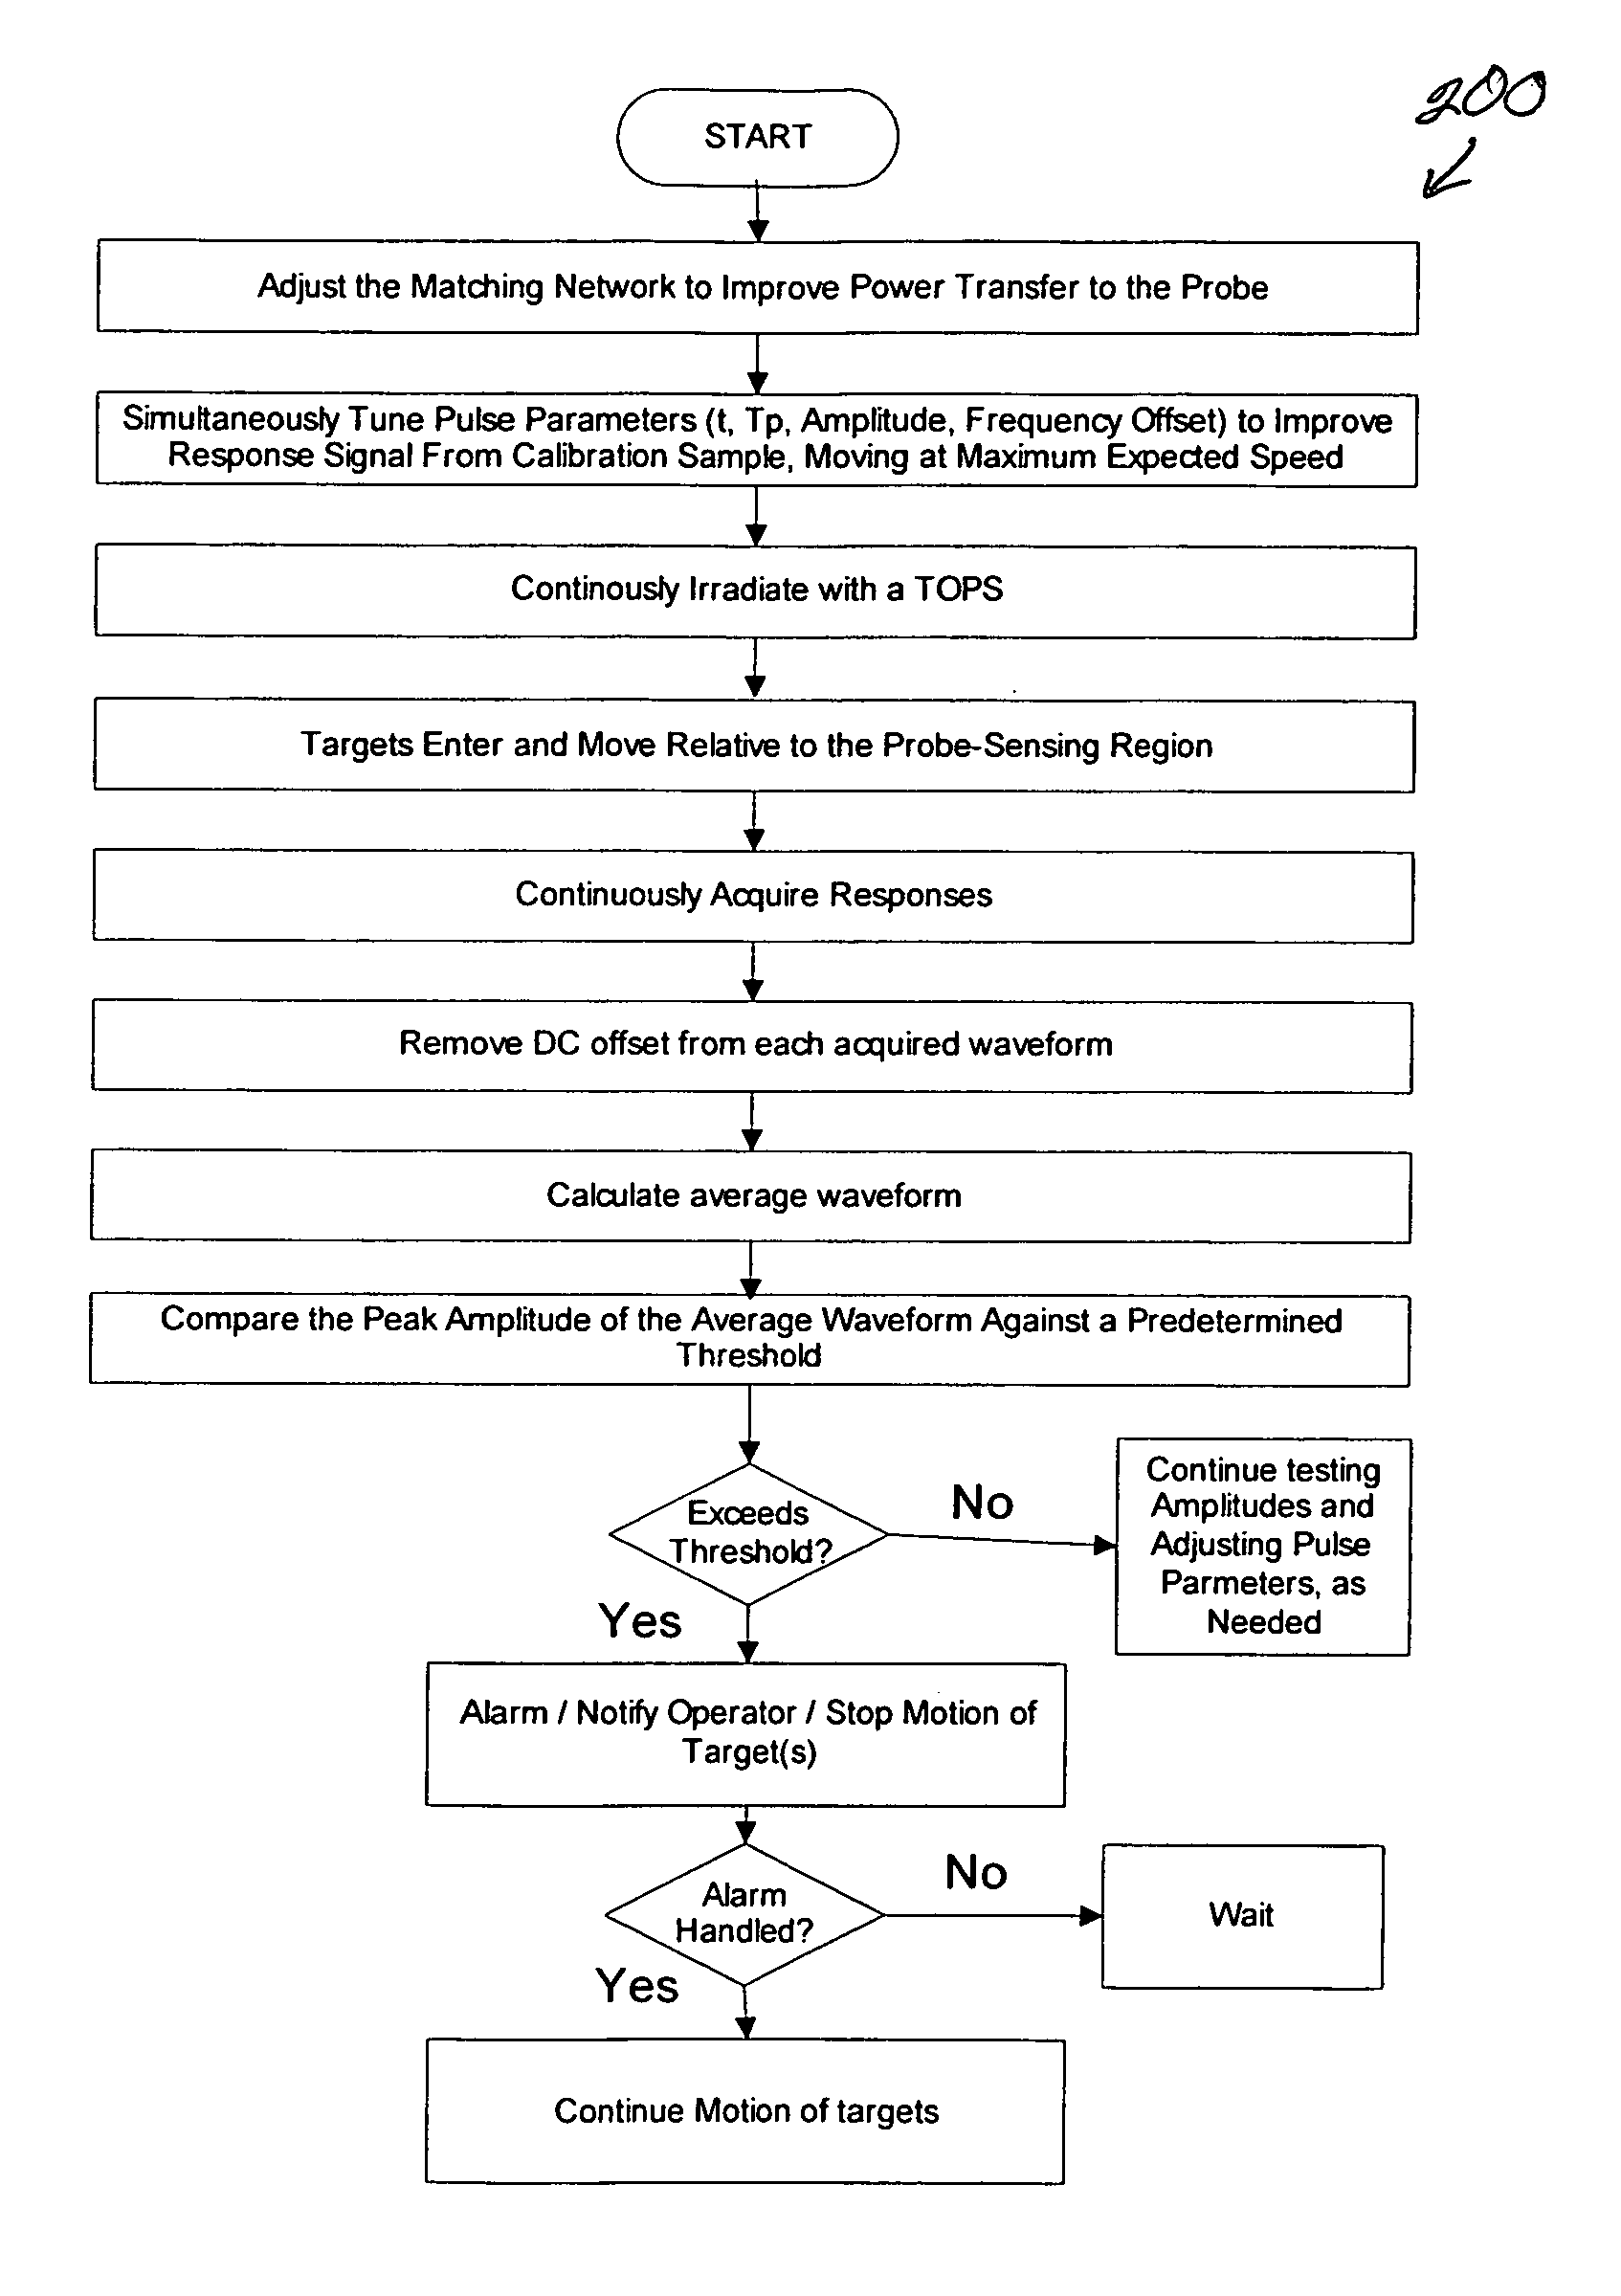 Method and apparatus for detection of quadrupole nuclei in motion relative to the search region